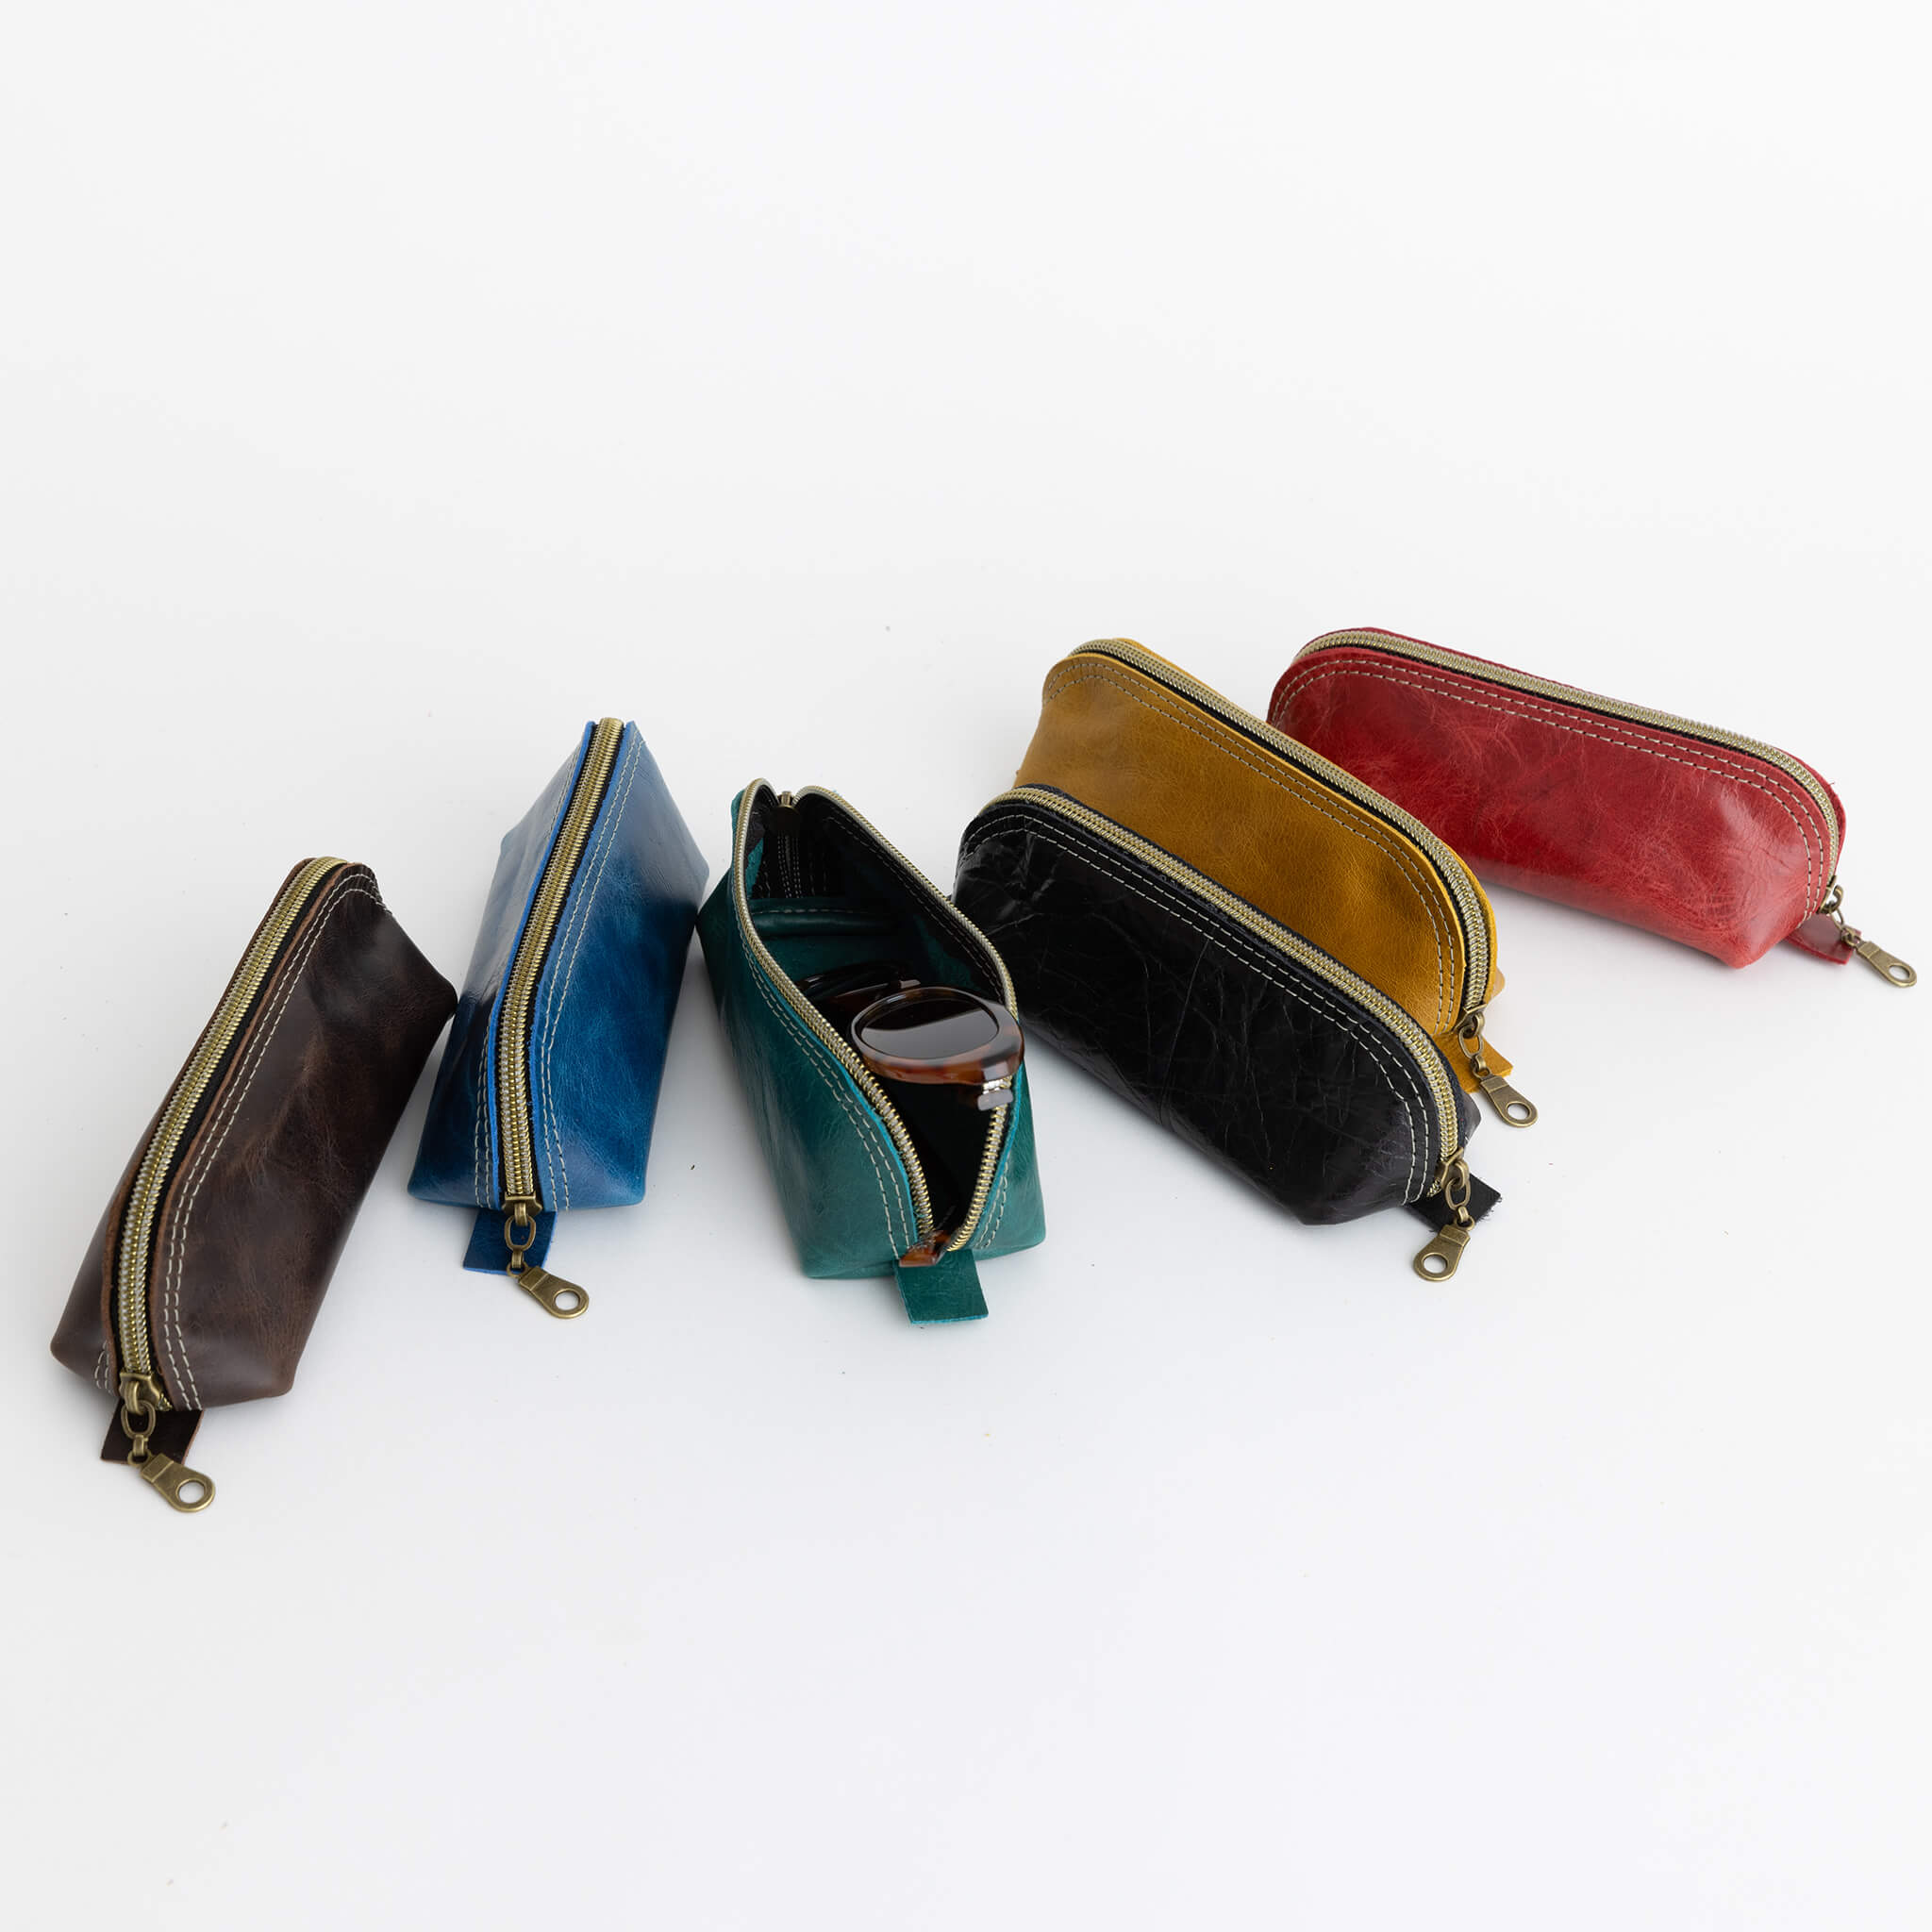 shelby pouch - zipper case - handmade leather - group view